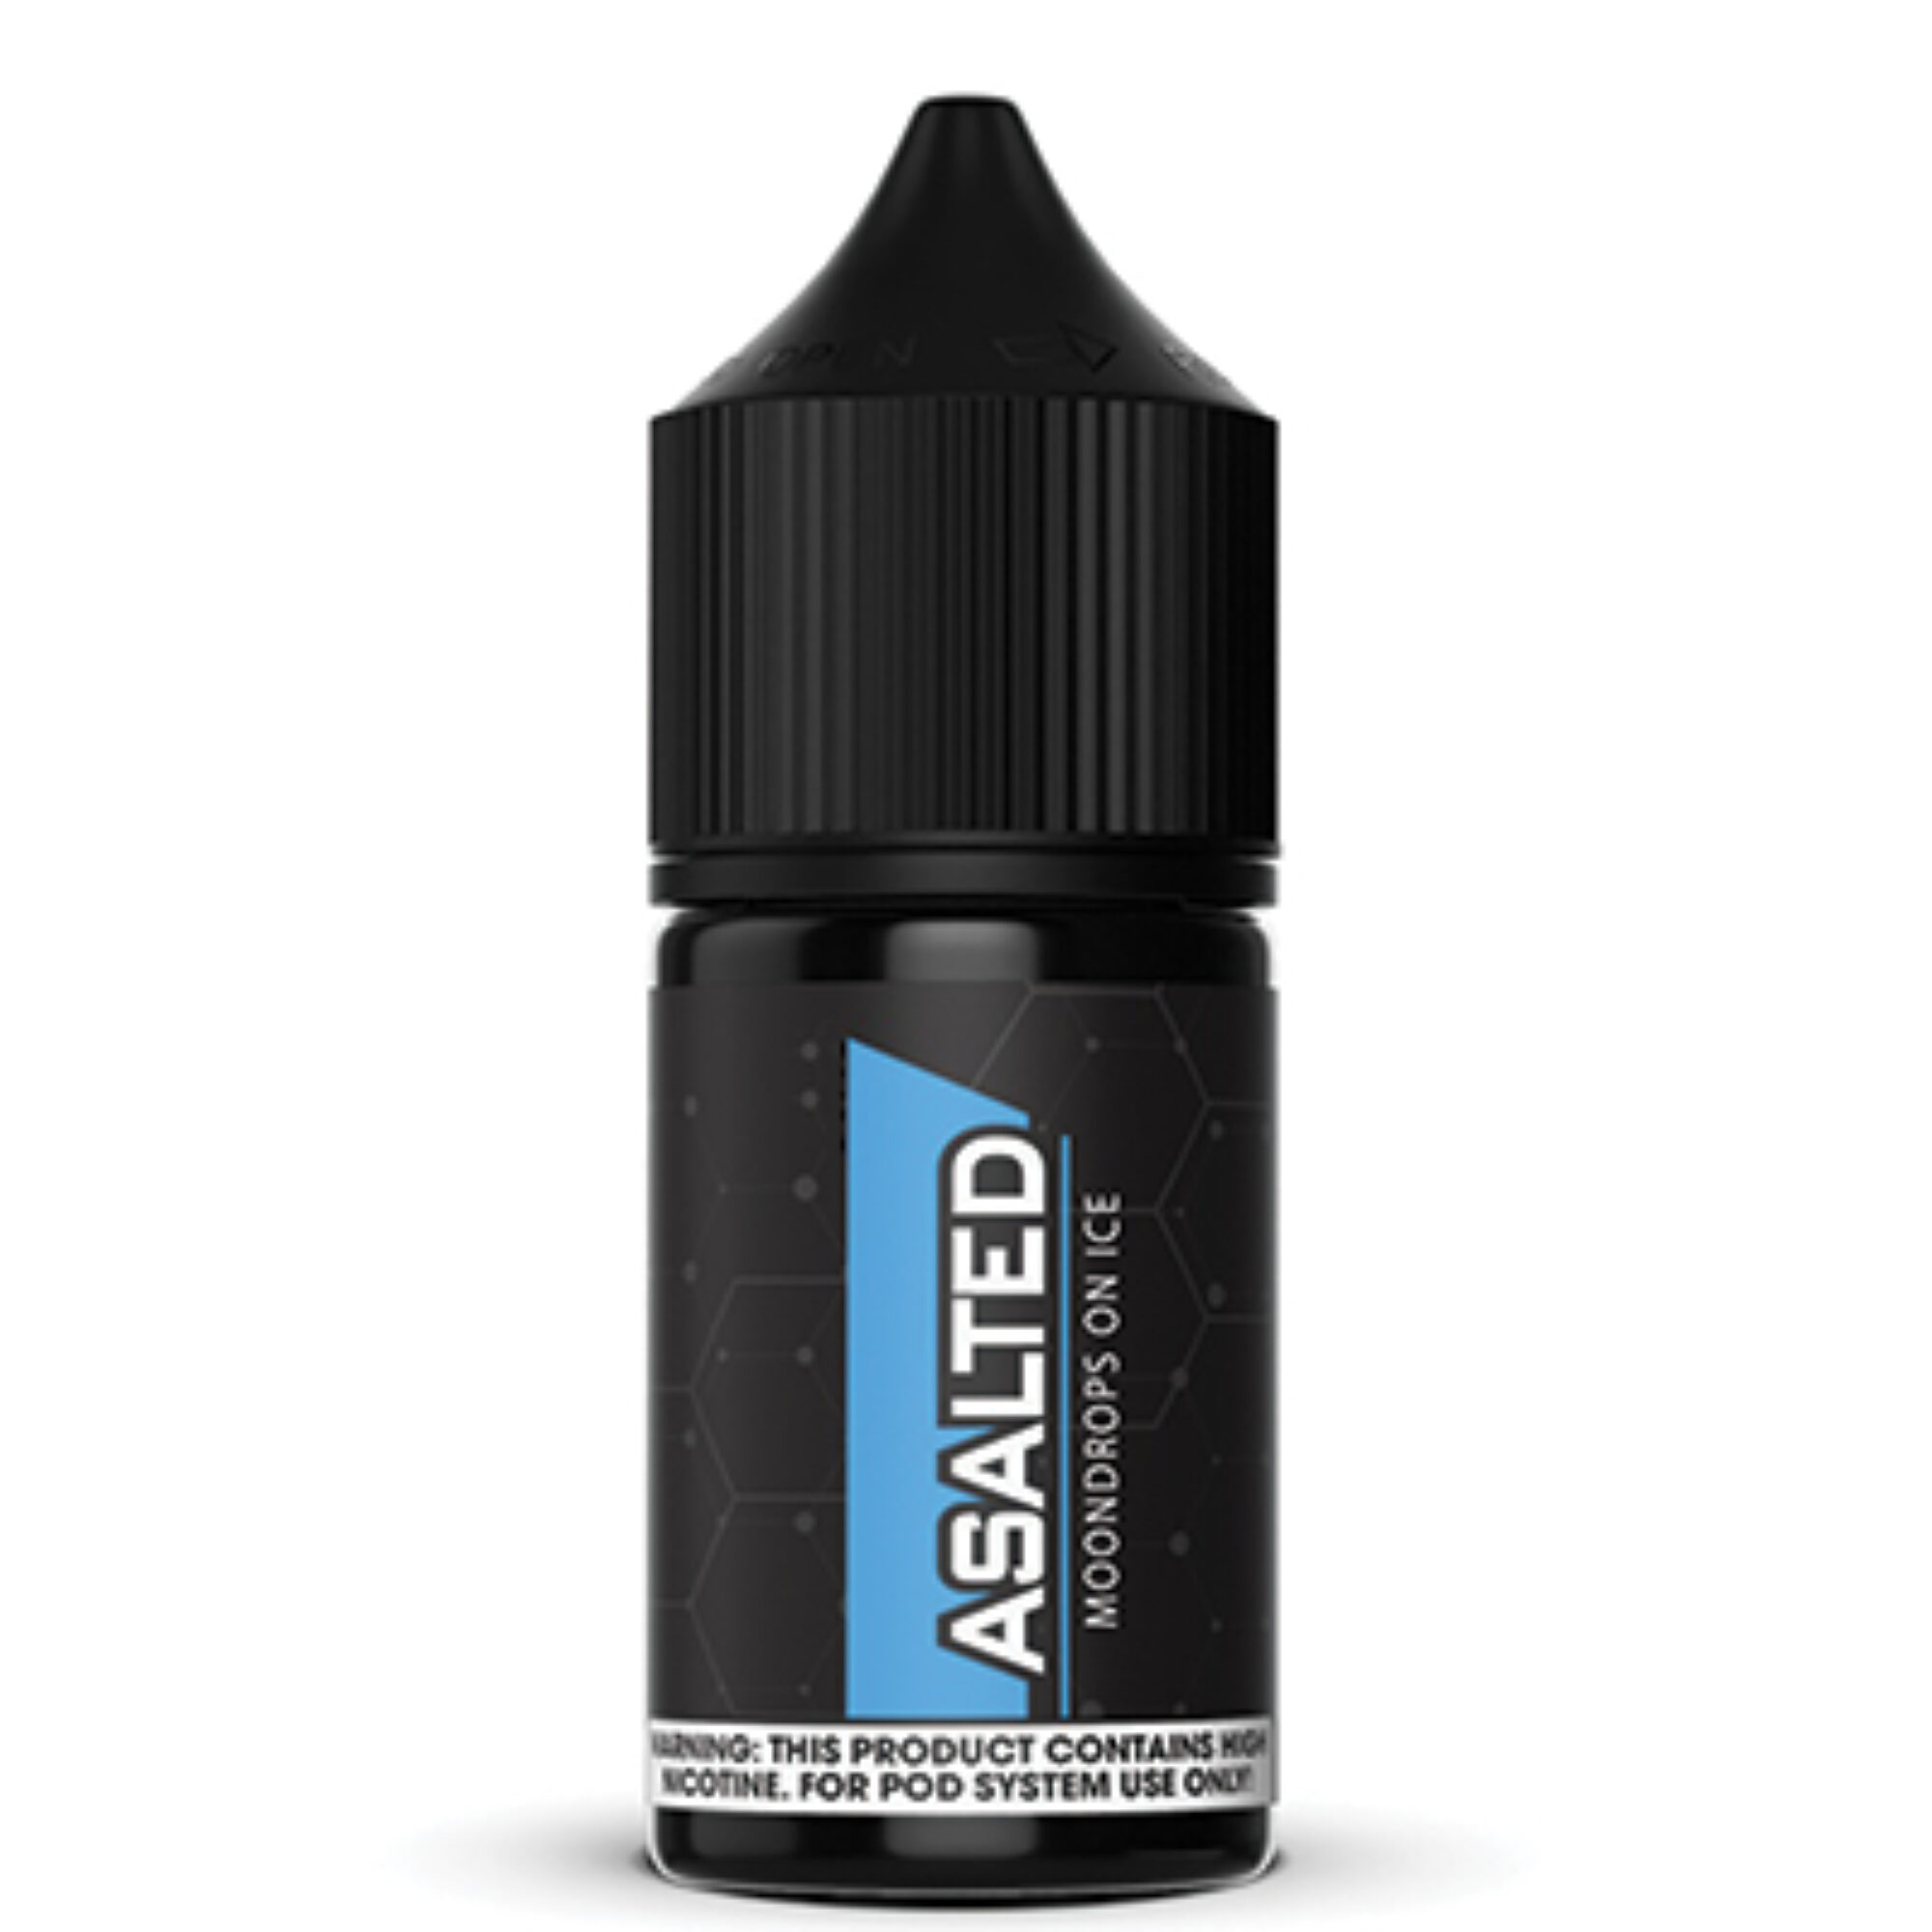 LocalGBOMAsaltedCollectionMoondropsIceBOOSTED30ml